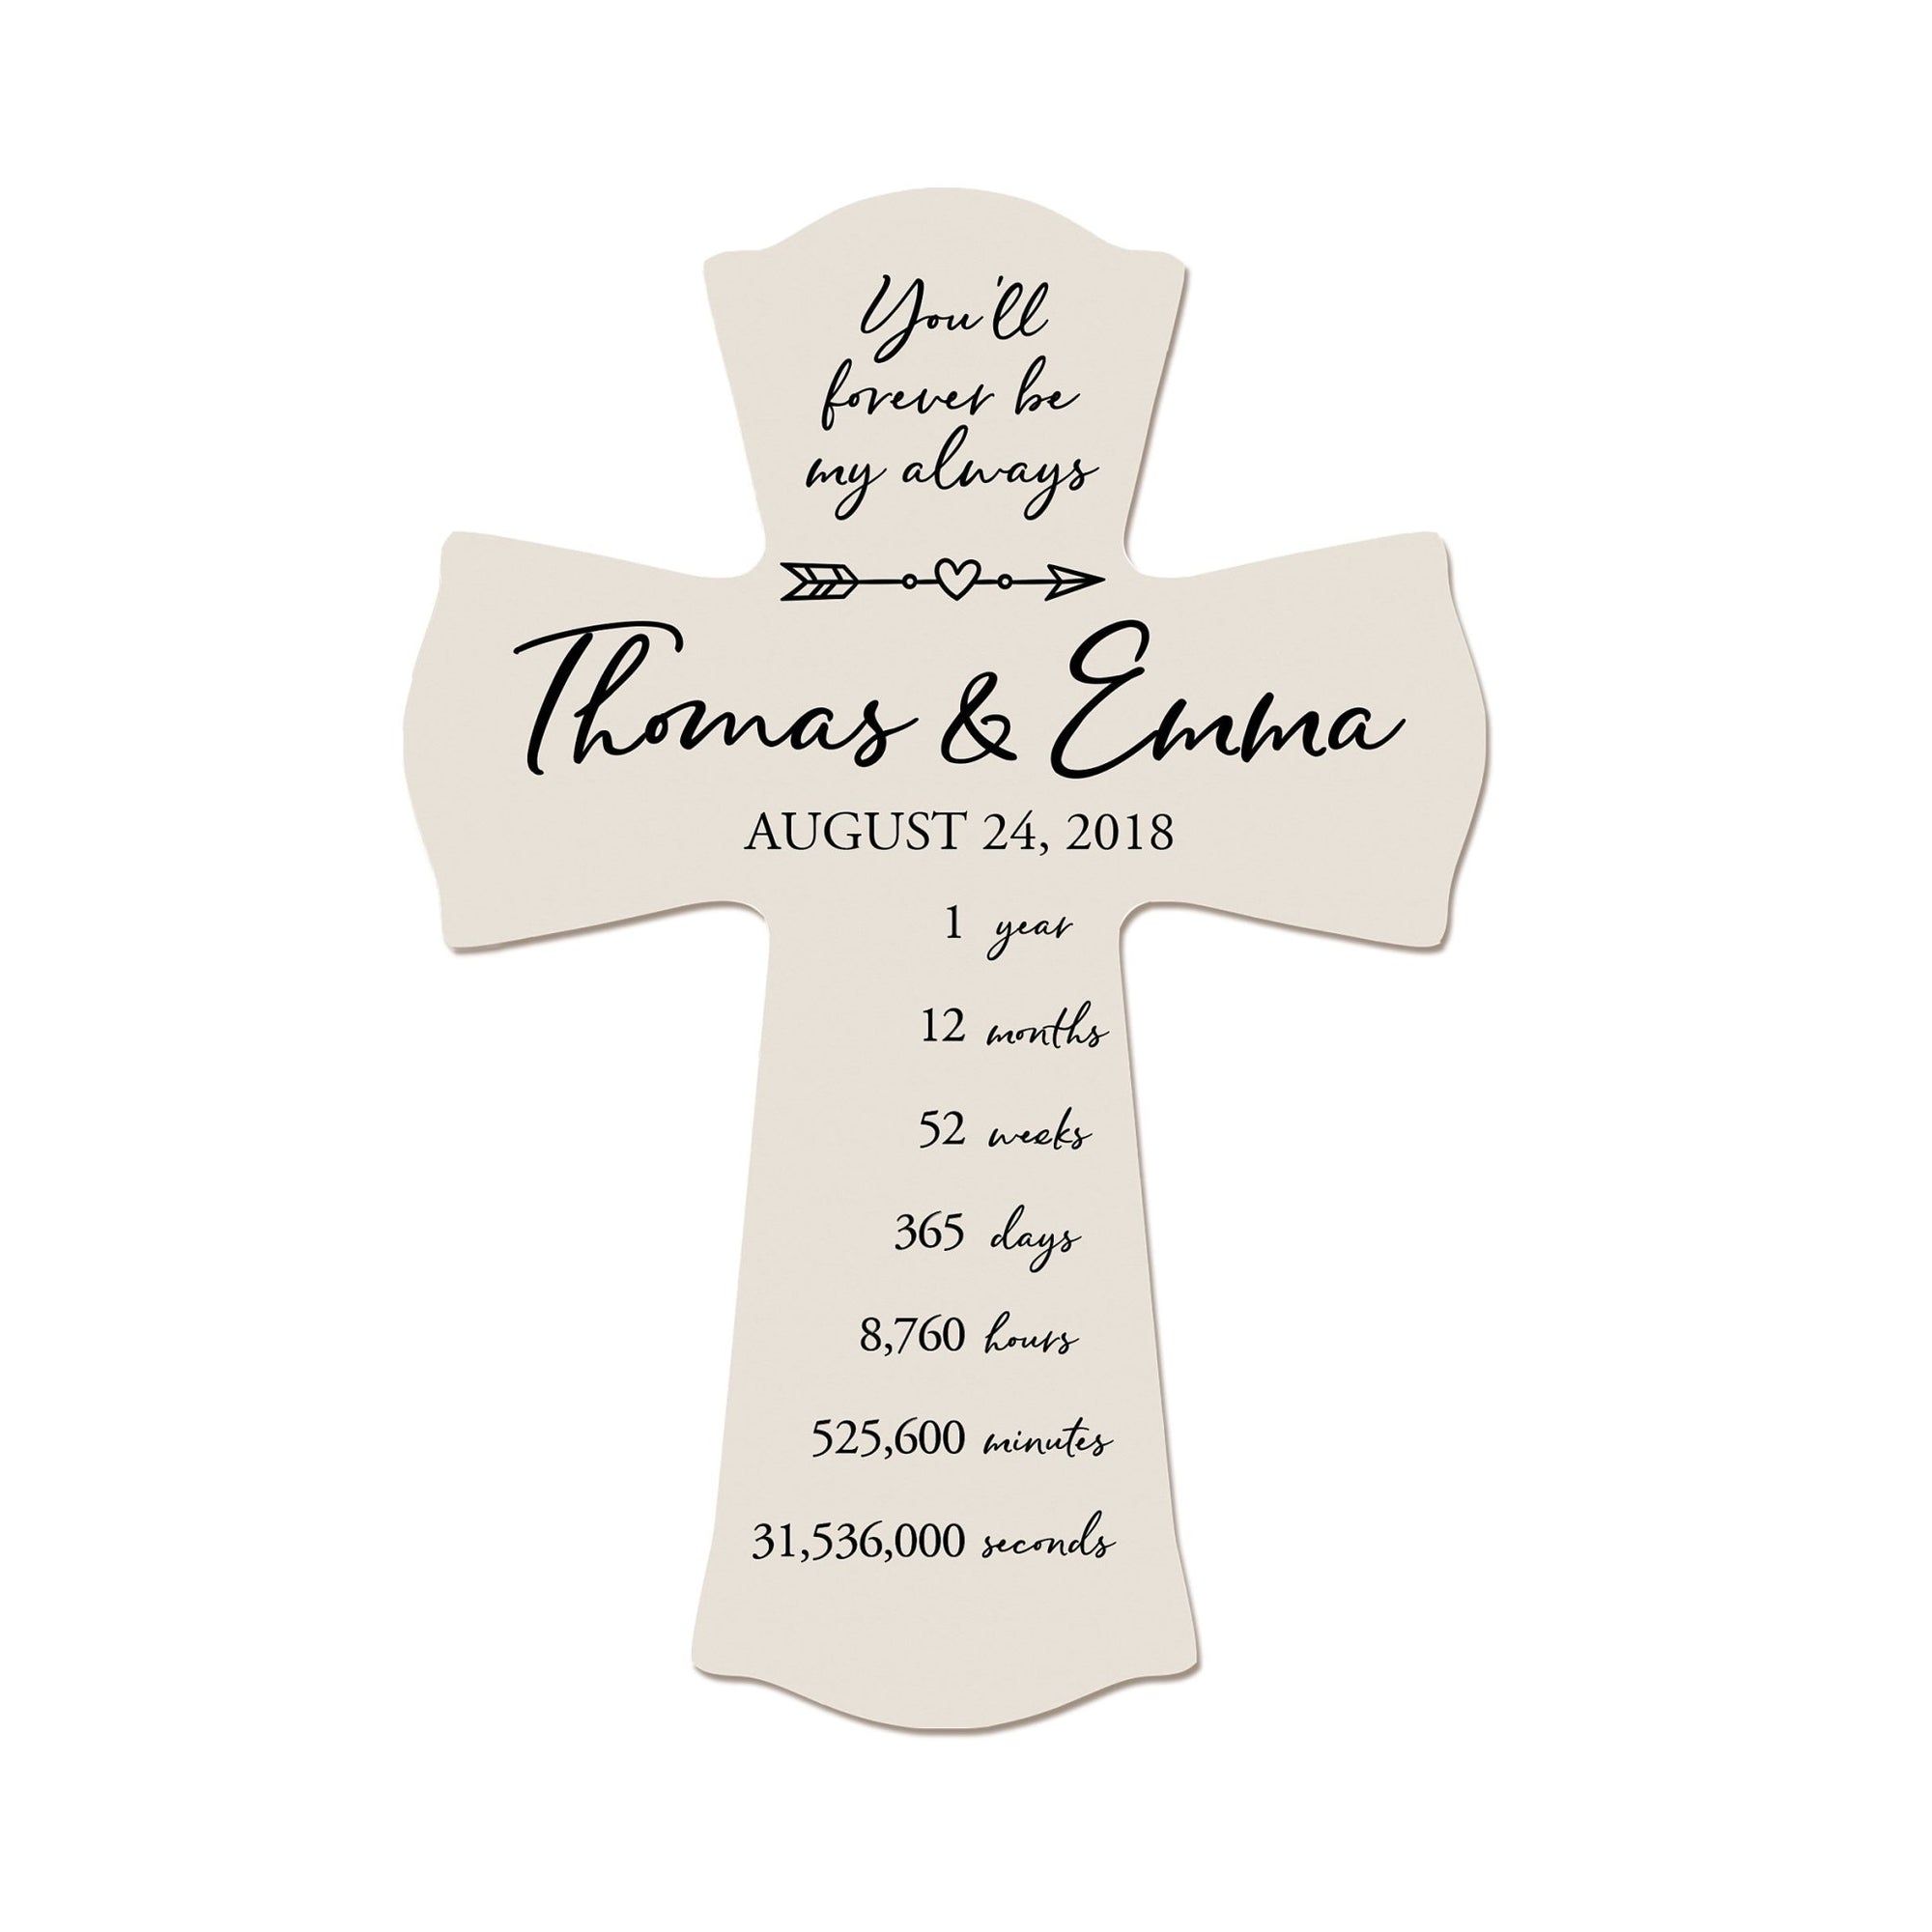 Unique Gifts for Couples - Customized Wall Cross for Wedding Anniversary